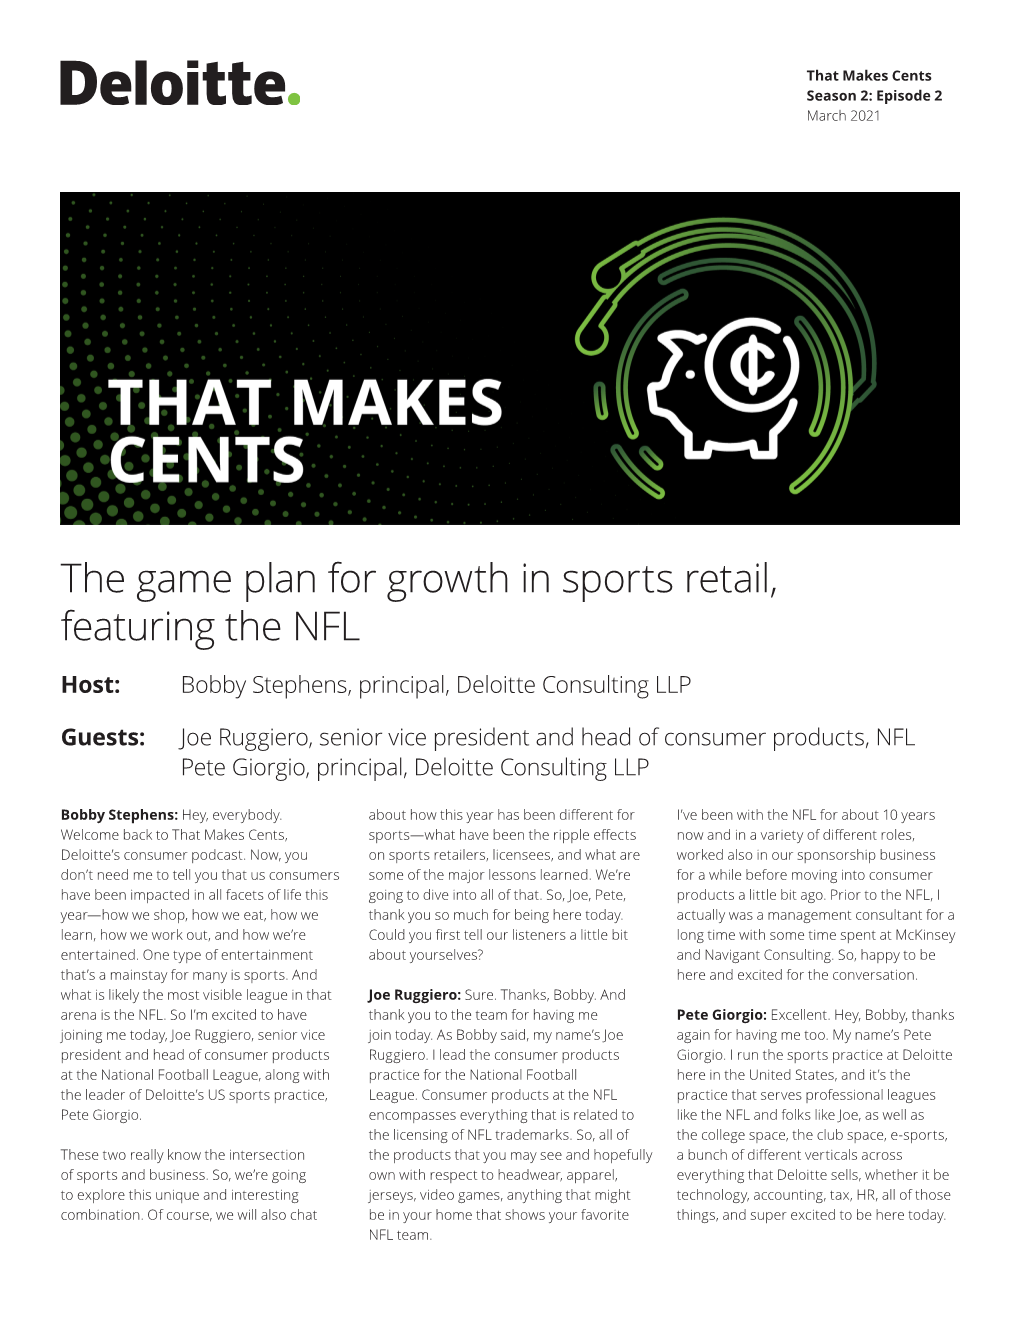 The Game Plan for Growth in Sports Retail, Featuring the NFL